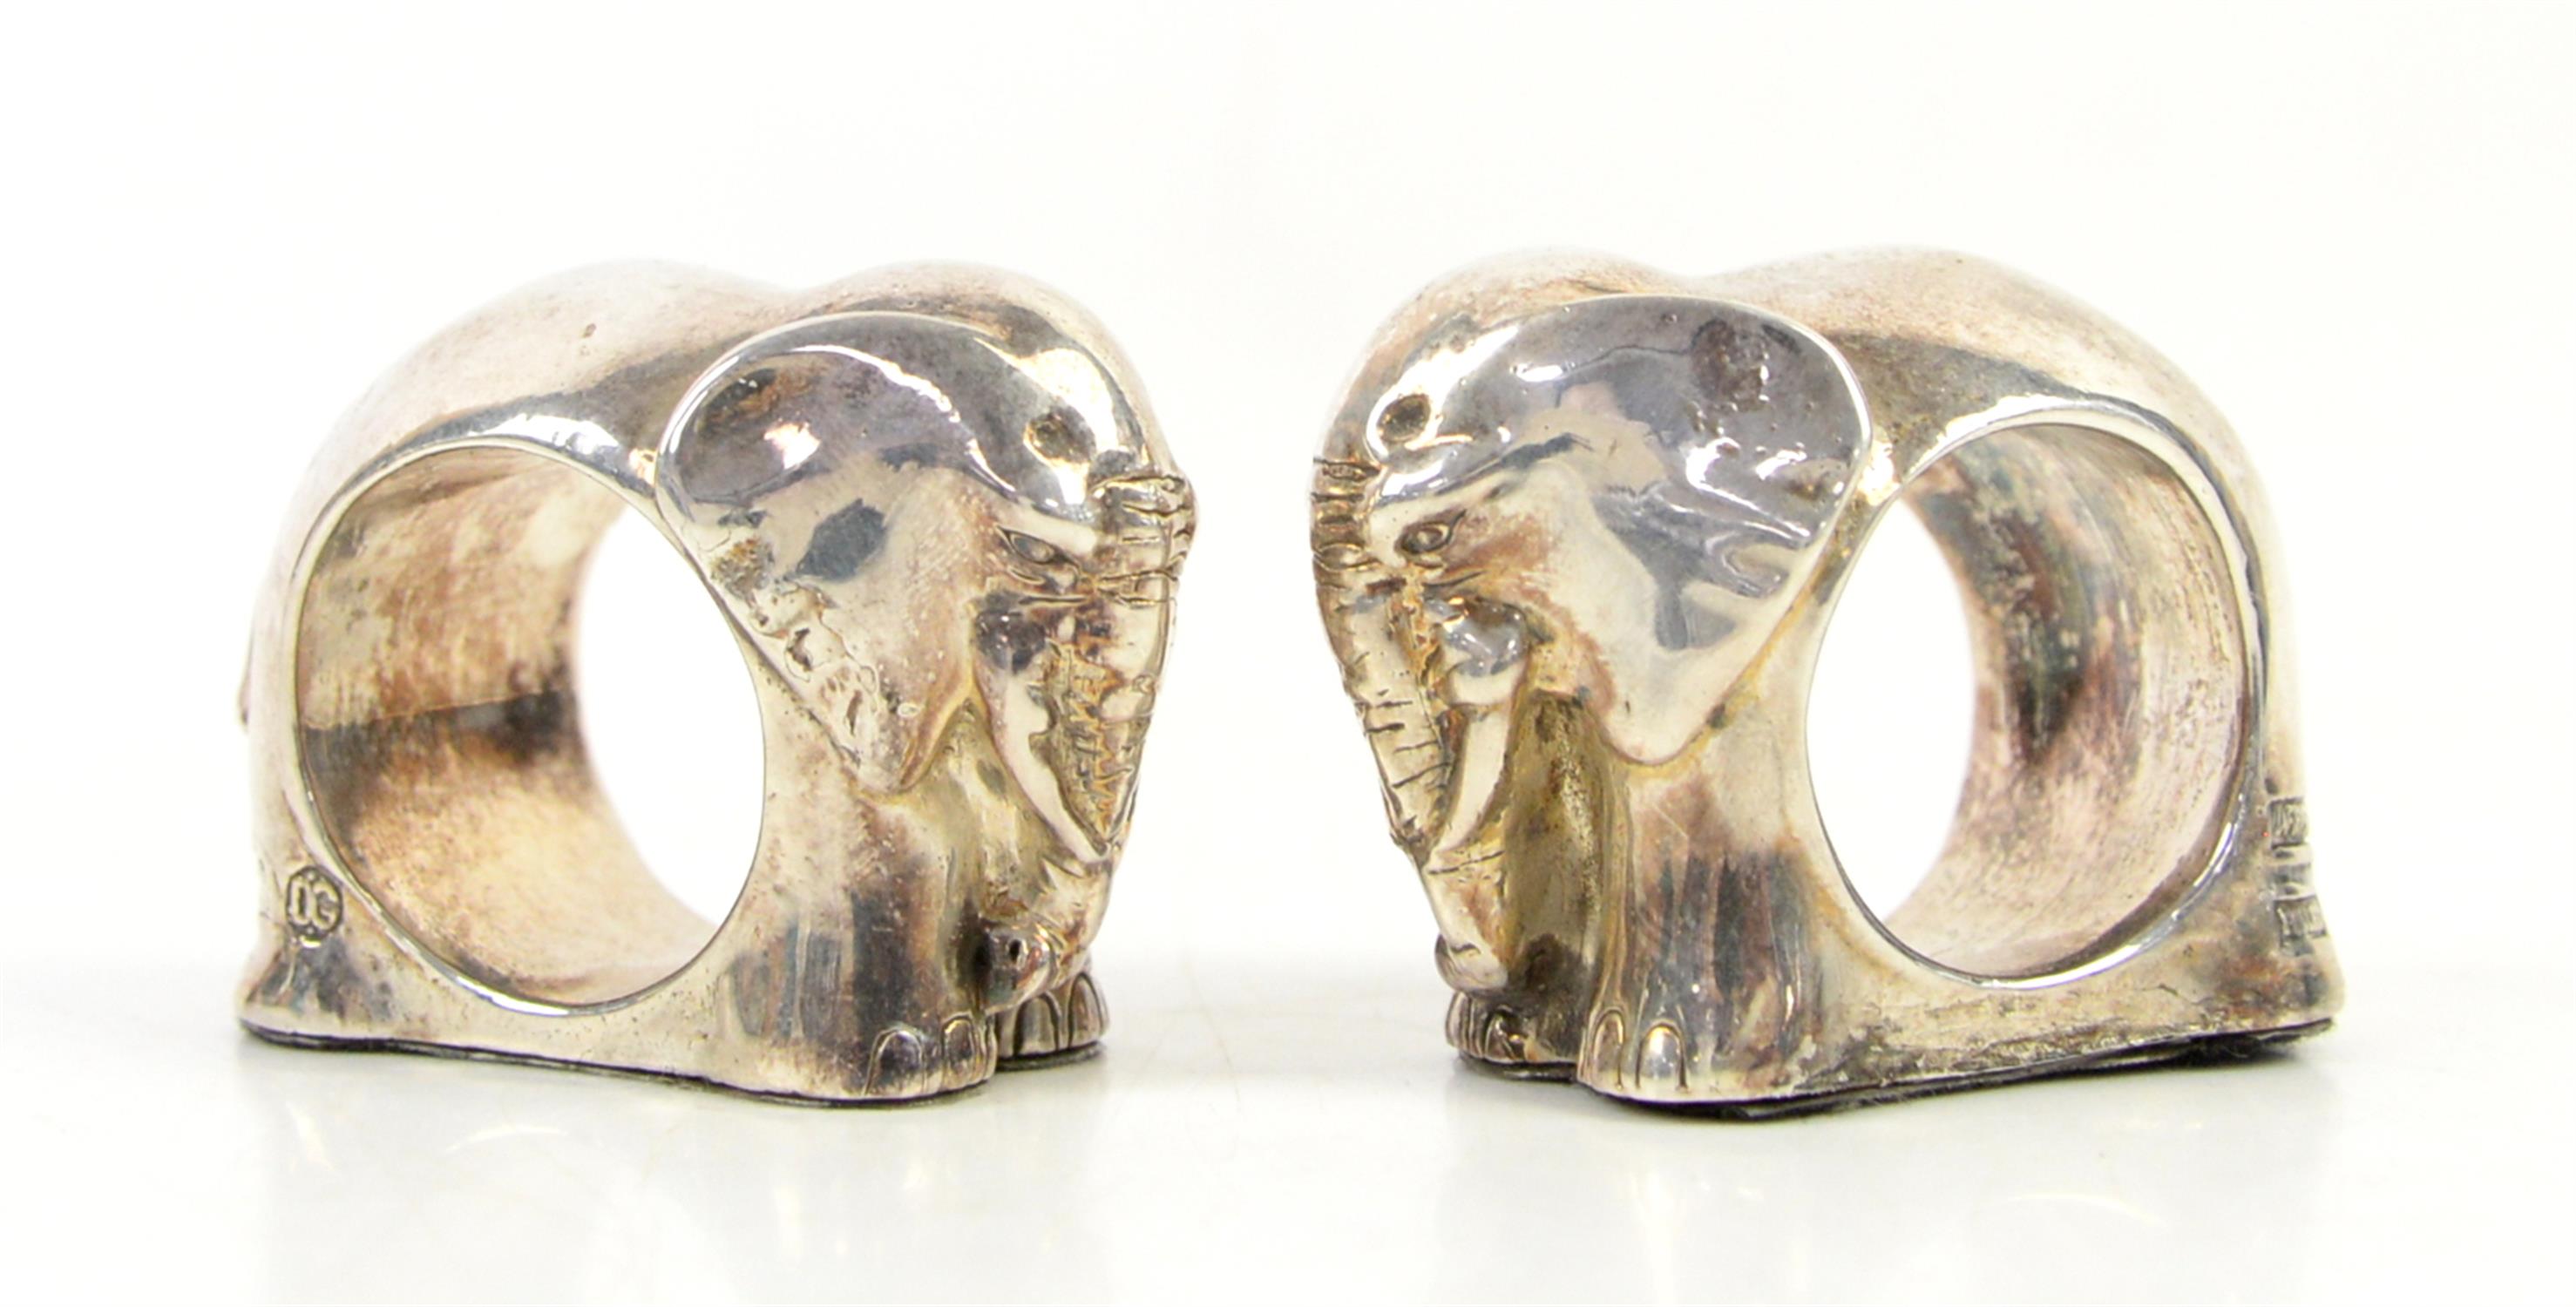 Novelty pair of South African silver napkin rings in the form of African Elephants by DG Afrisiher